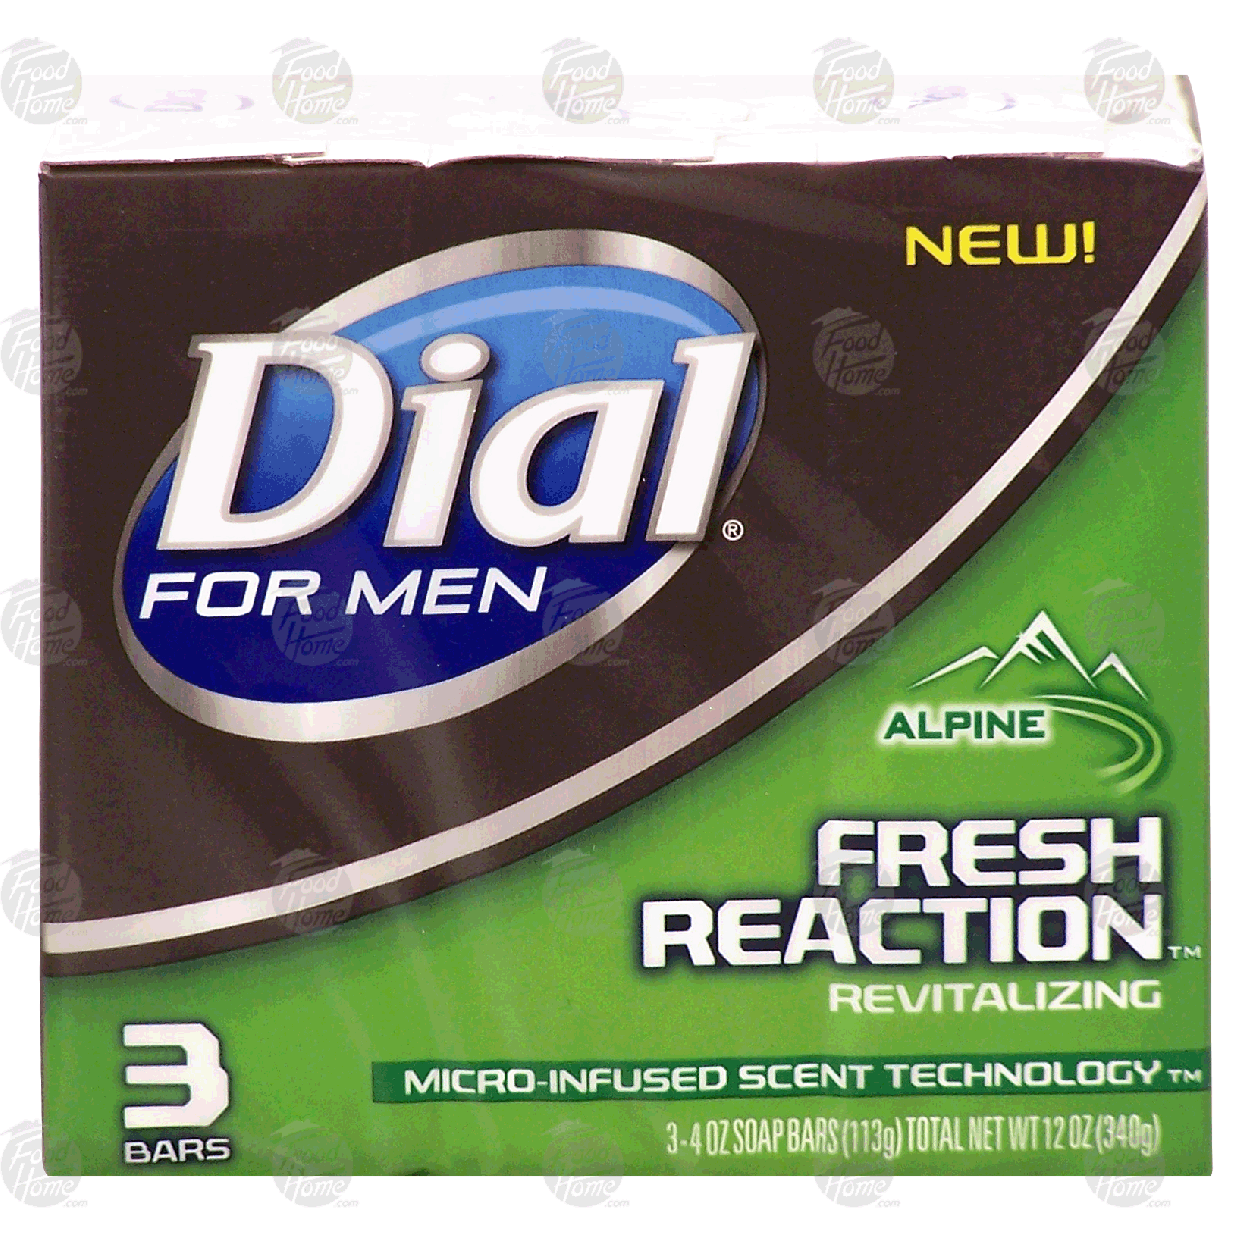 Dial For Men Fresh Reaction Soap Bars Micro Infused Scent